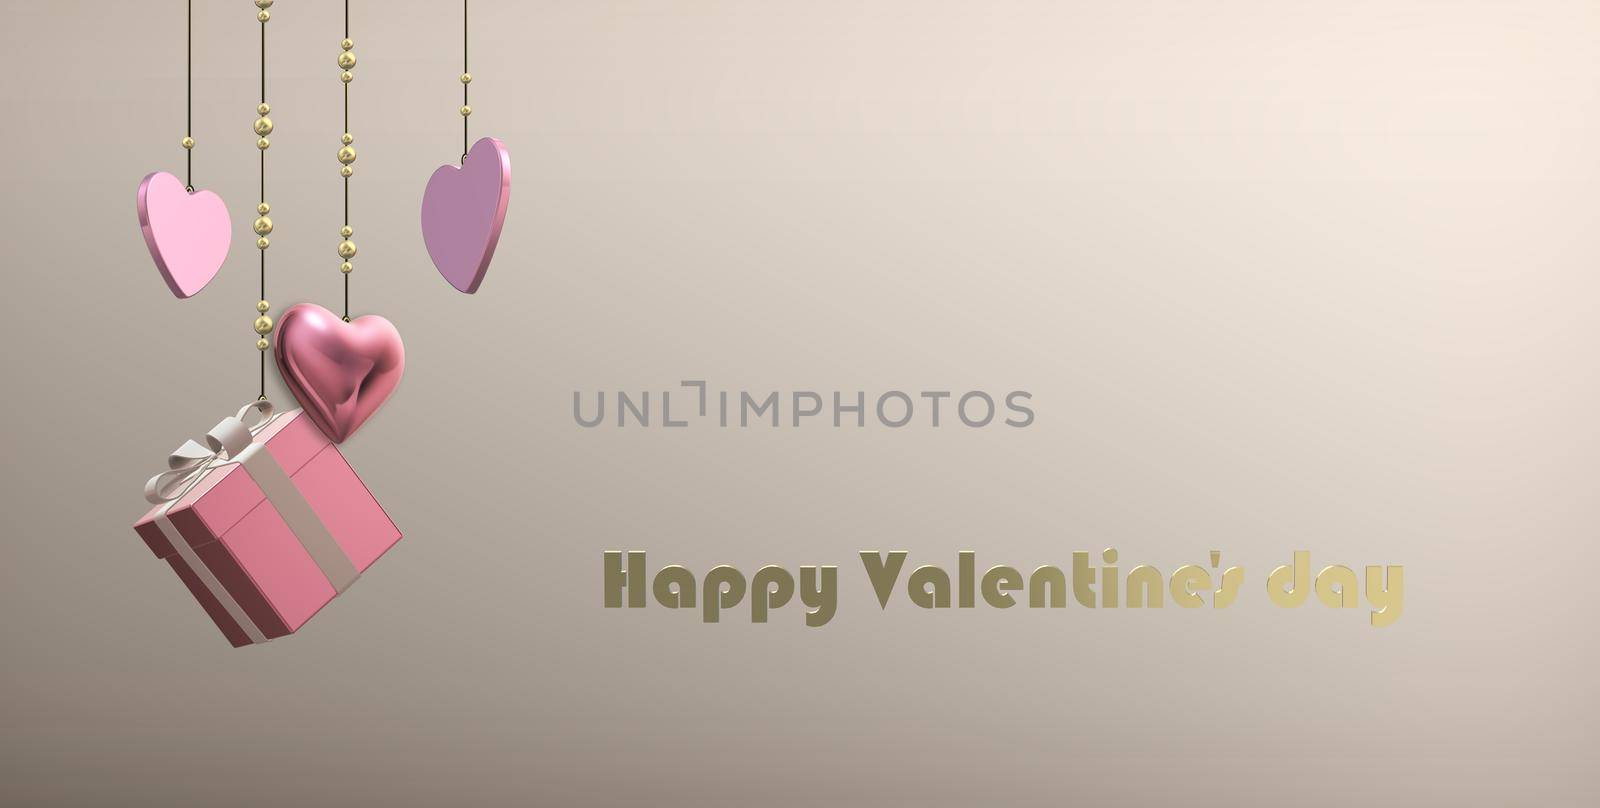 Luxury Valentines card, love design, hanging pink gold hearts, gift box on pastel background. Gold text Happy Valentine's day. Elegant design, template for love card. 3D illustration